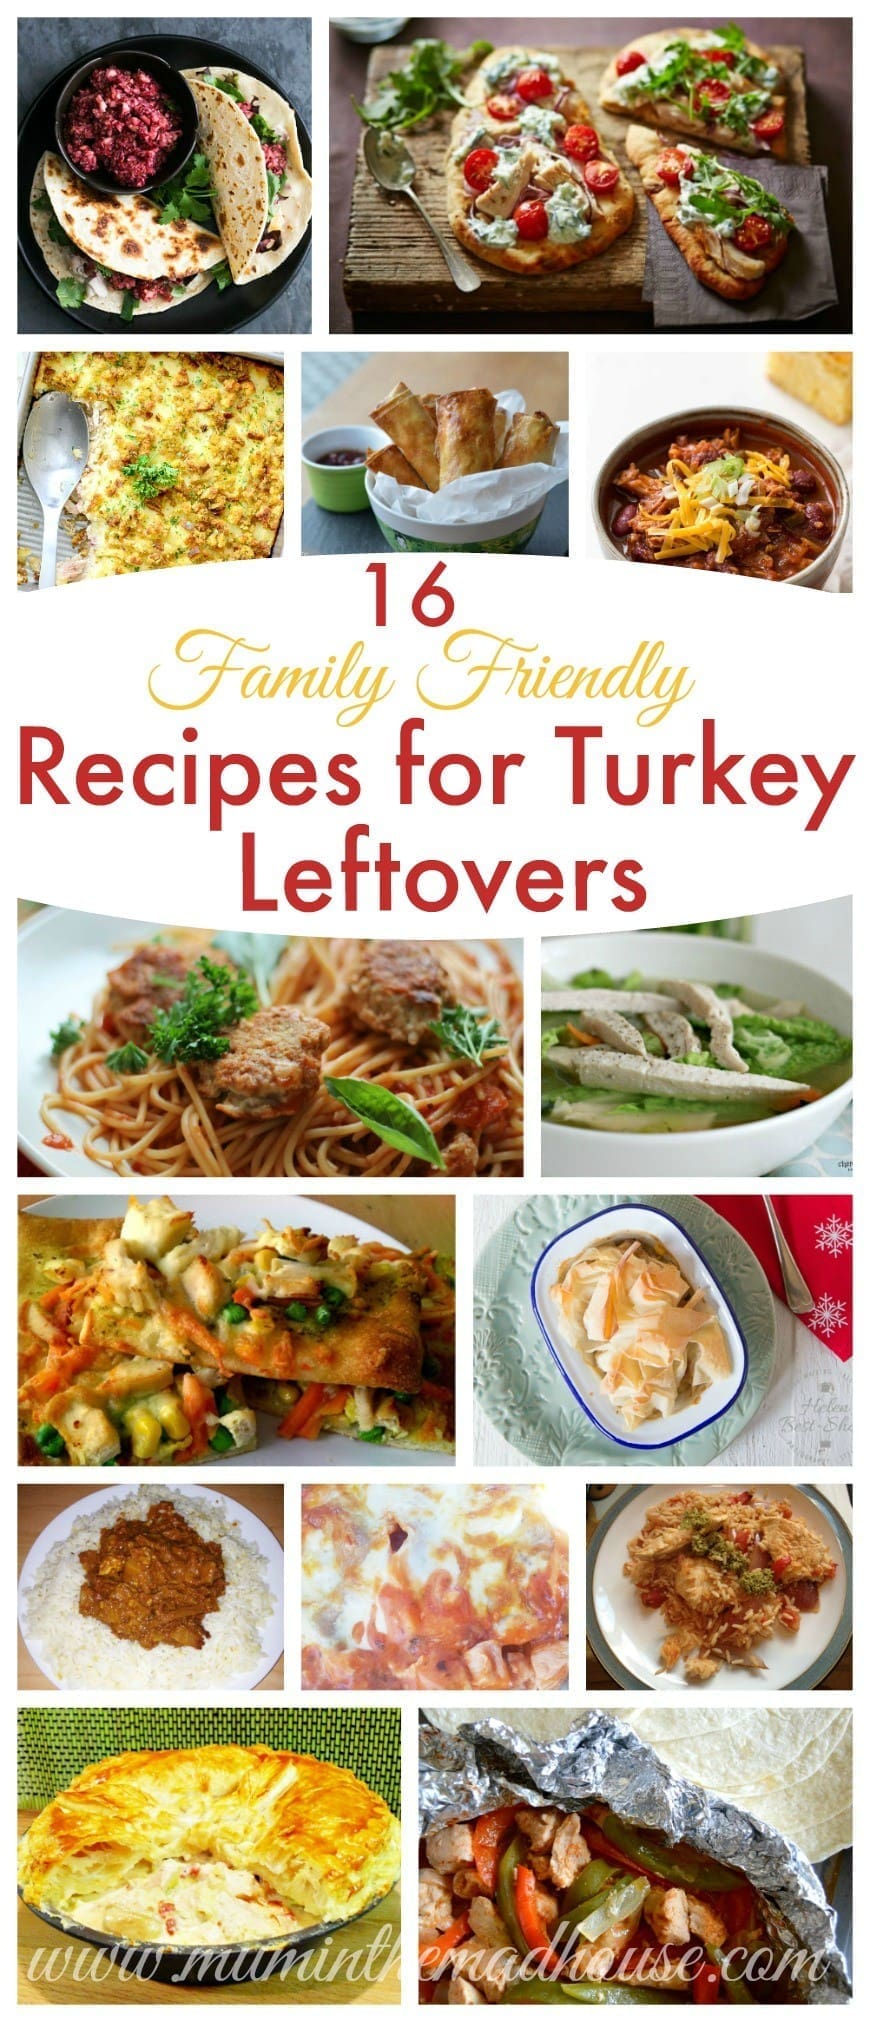 16 Leftover turkey recipes that the whole family will love. 16 Family friendly leftover turkey recipes. Make sure you make the most of your turkey leftovers with these recipes the whole family will adore 